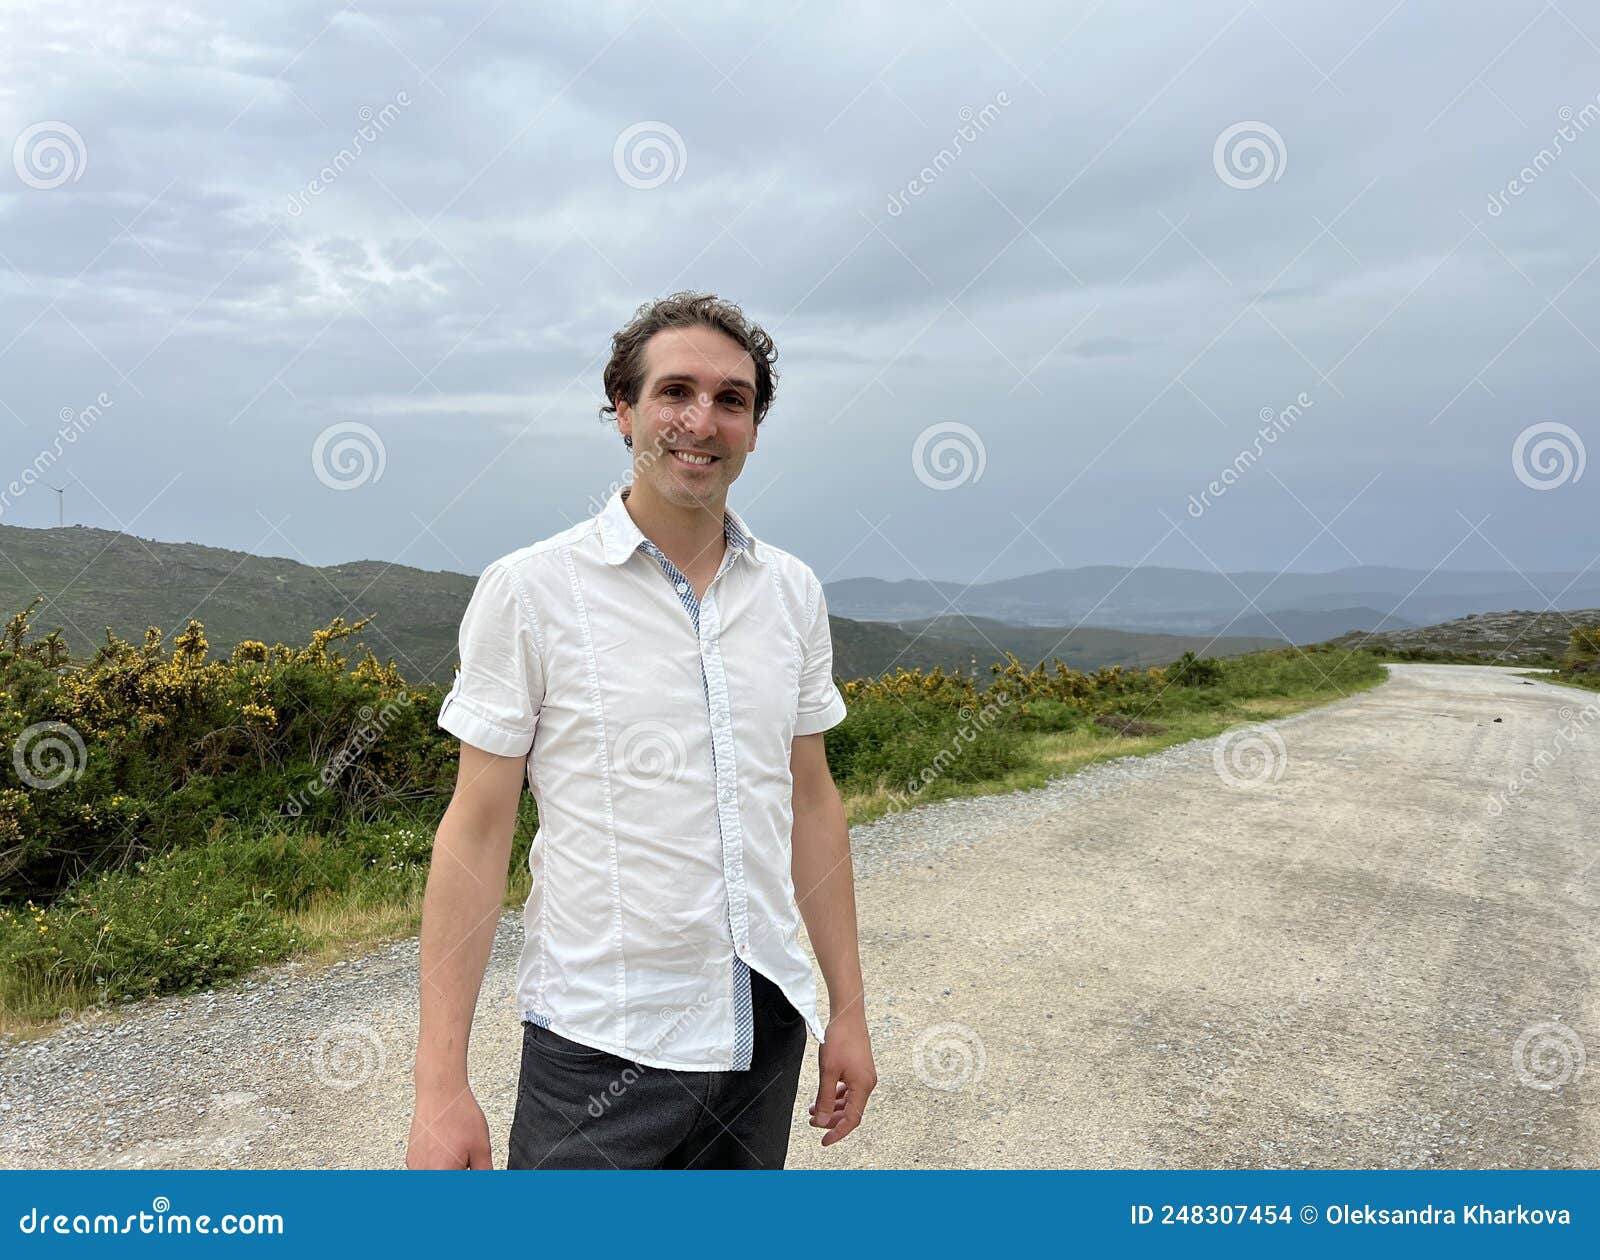 a handsome french or spaniard man in a white shirt stands against the backdrop of mountains